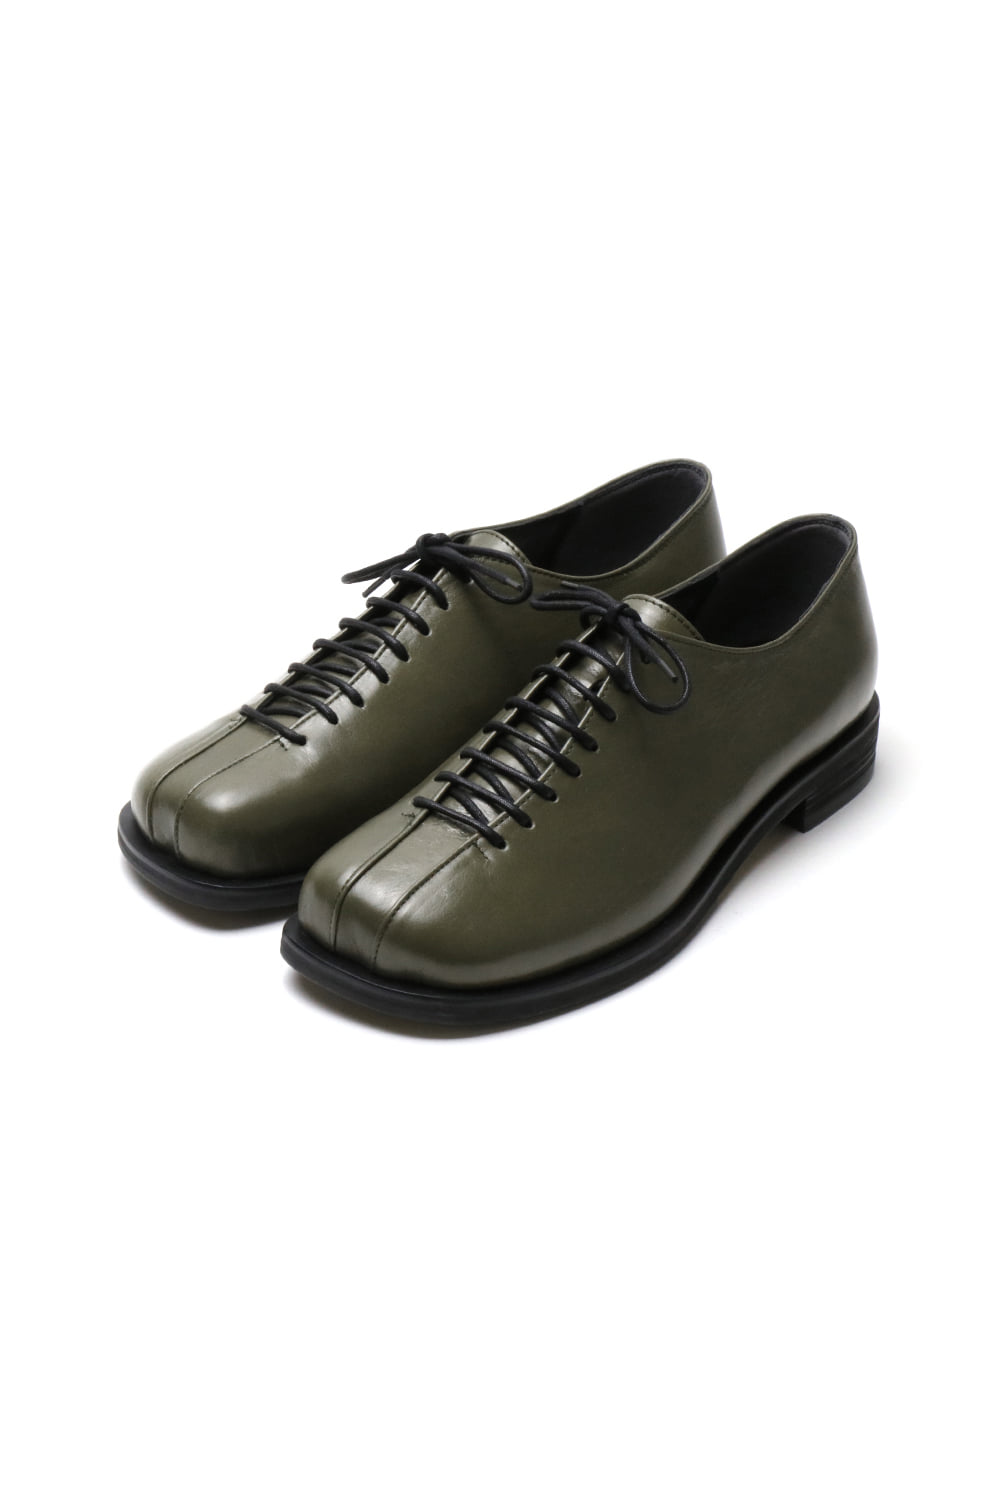 MONET OXFORD [OLIVE GREEN]